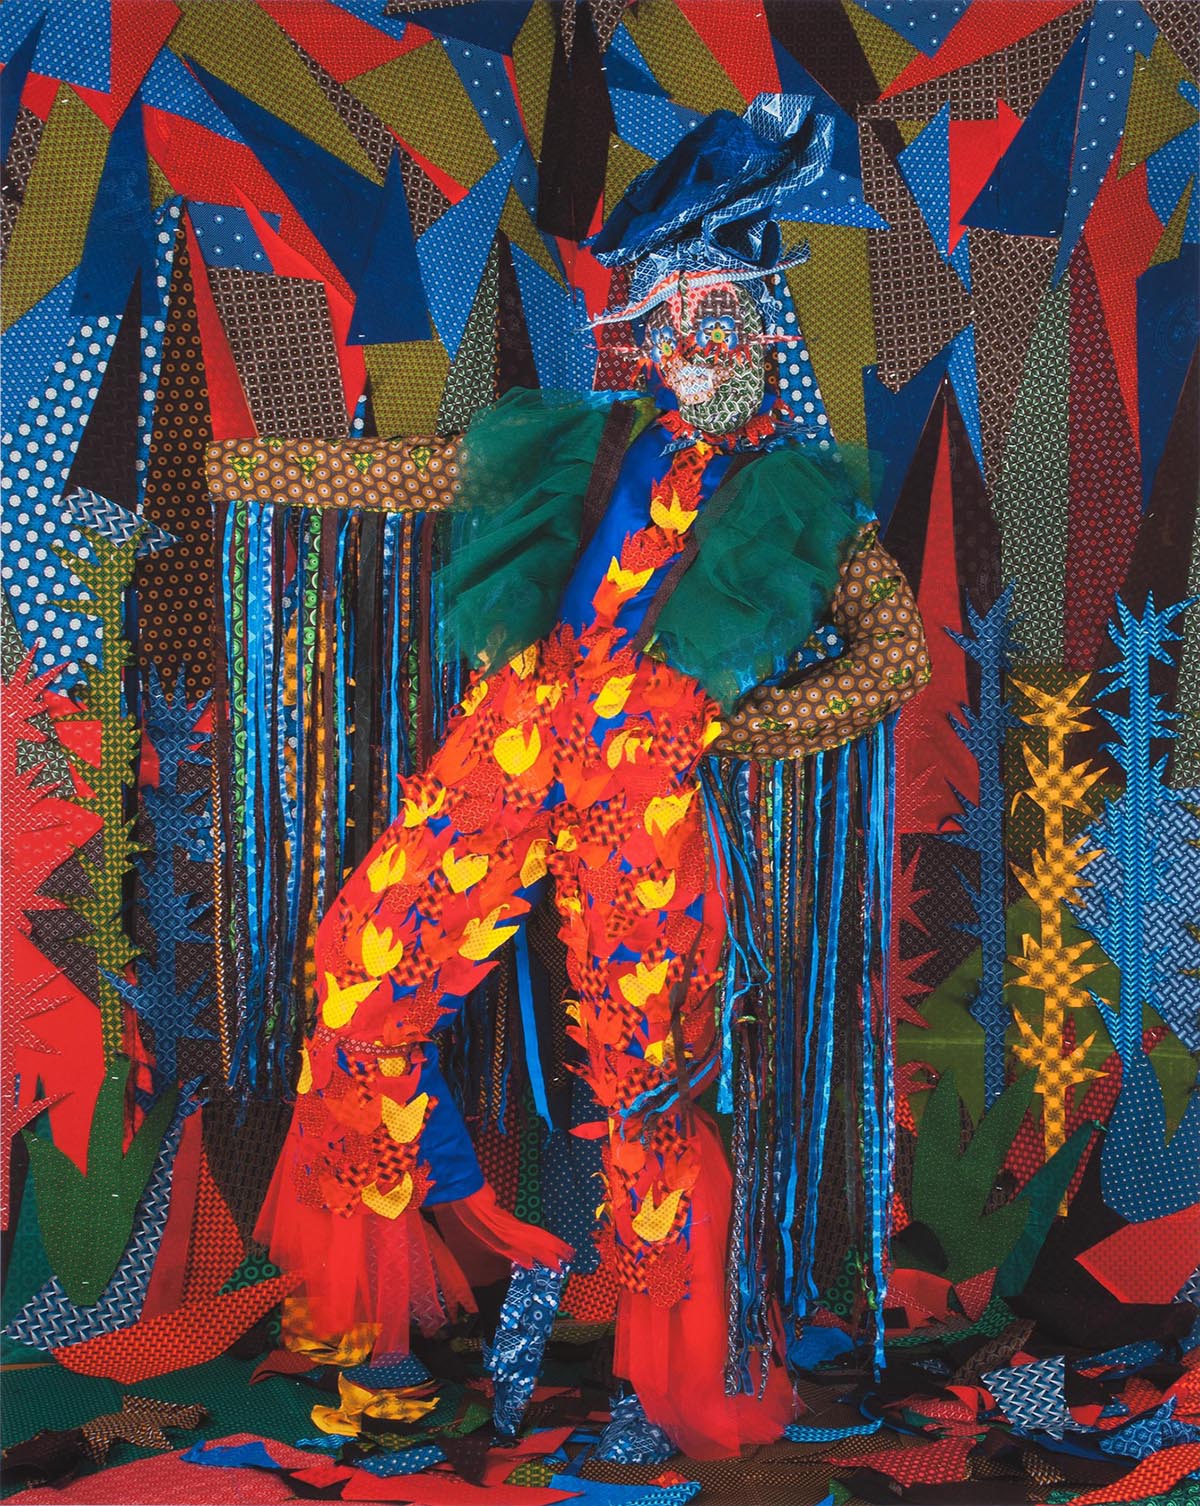  A person wearing a colorful mask and costume covering their whole body poses in front of a brightly patterned backdrop 